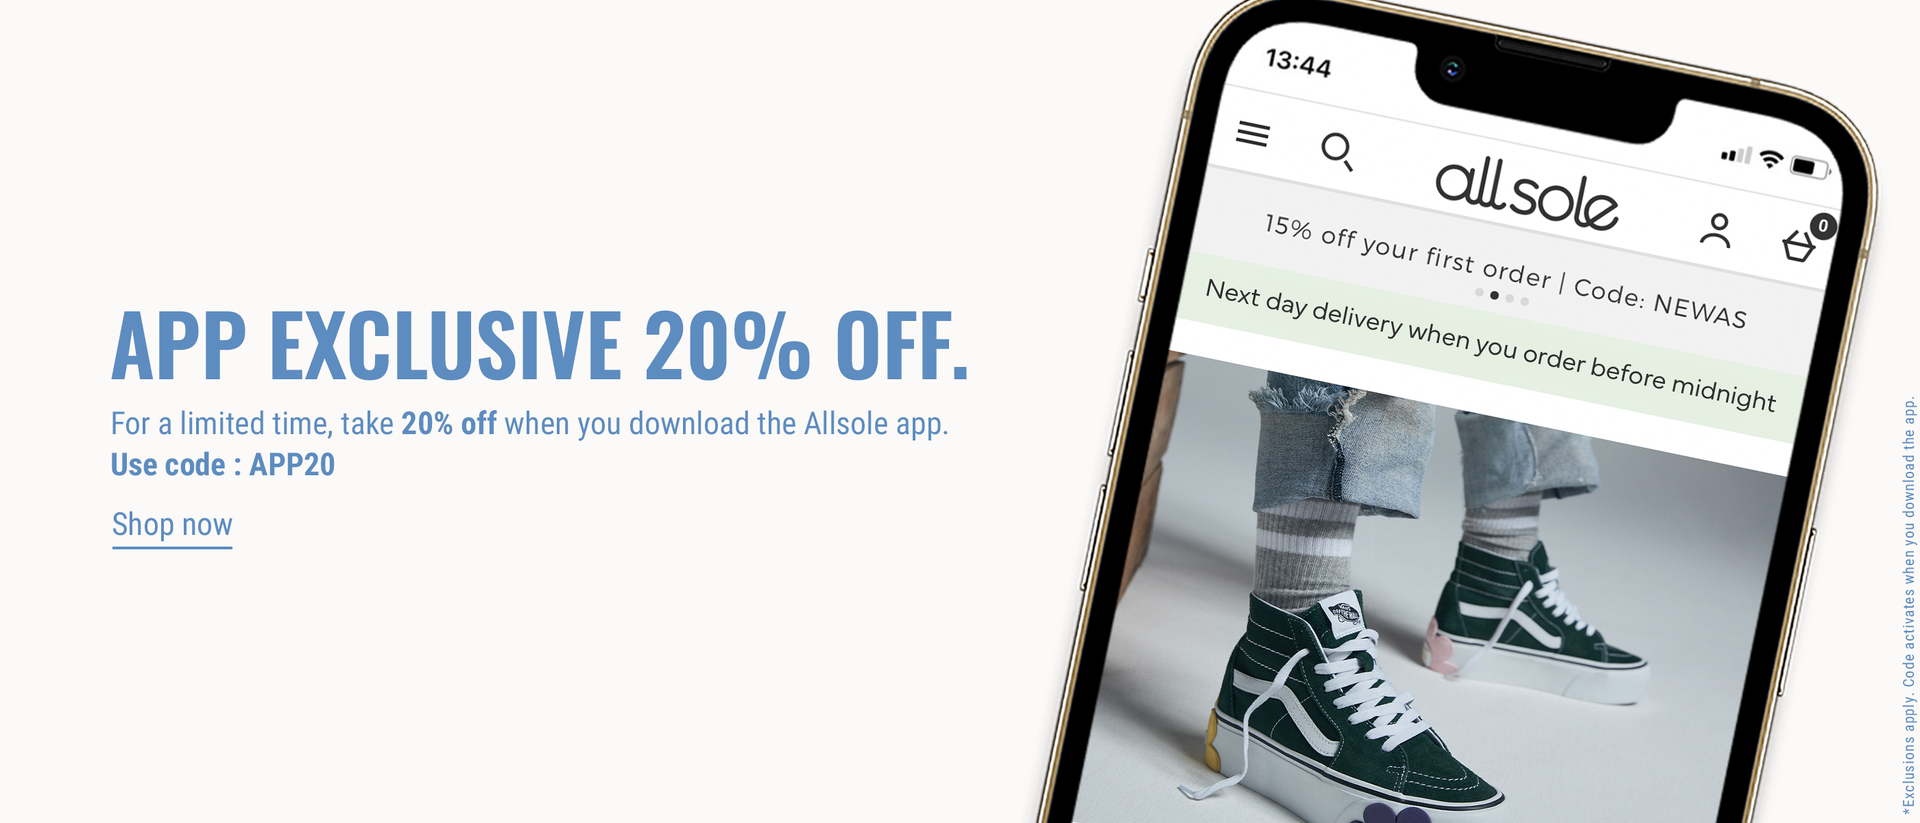 App Exclusive 20% Off. For a limited time, take 20% off when you download the Allsole app. Use code: APP20